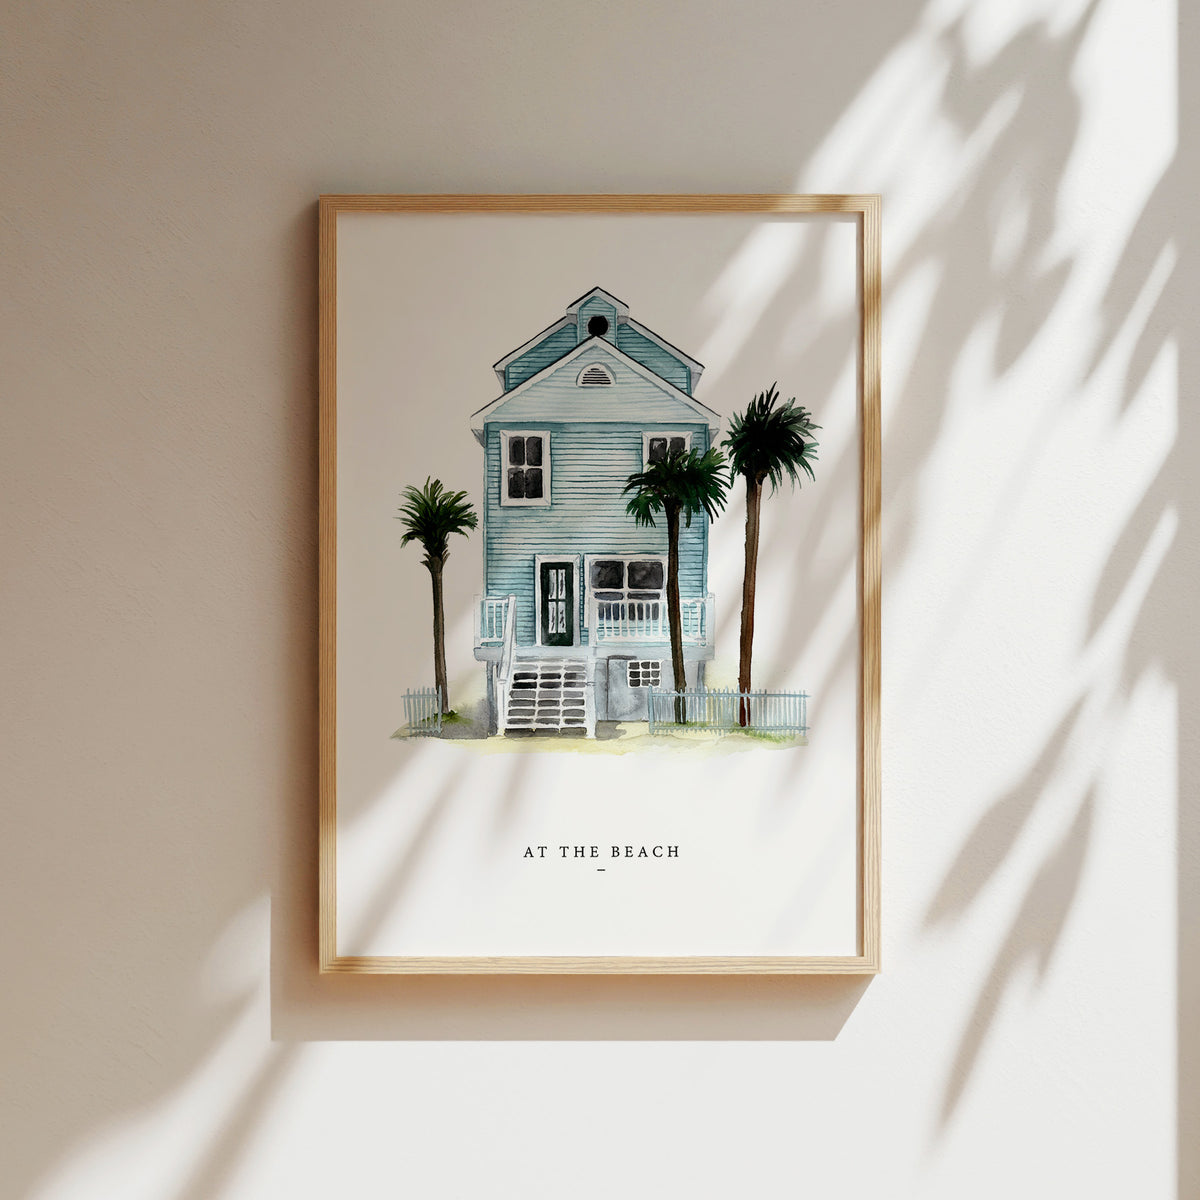 Art Print - Places | At the beach